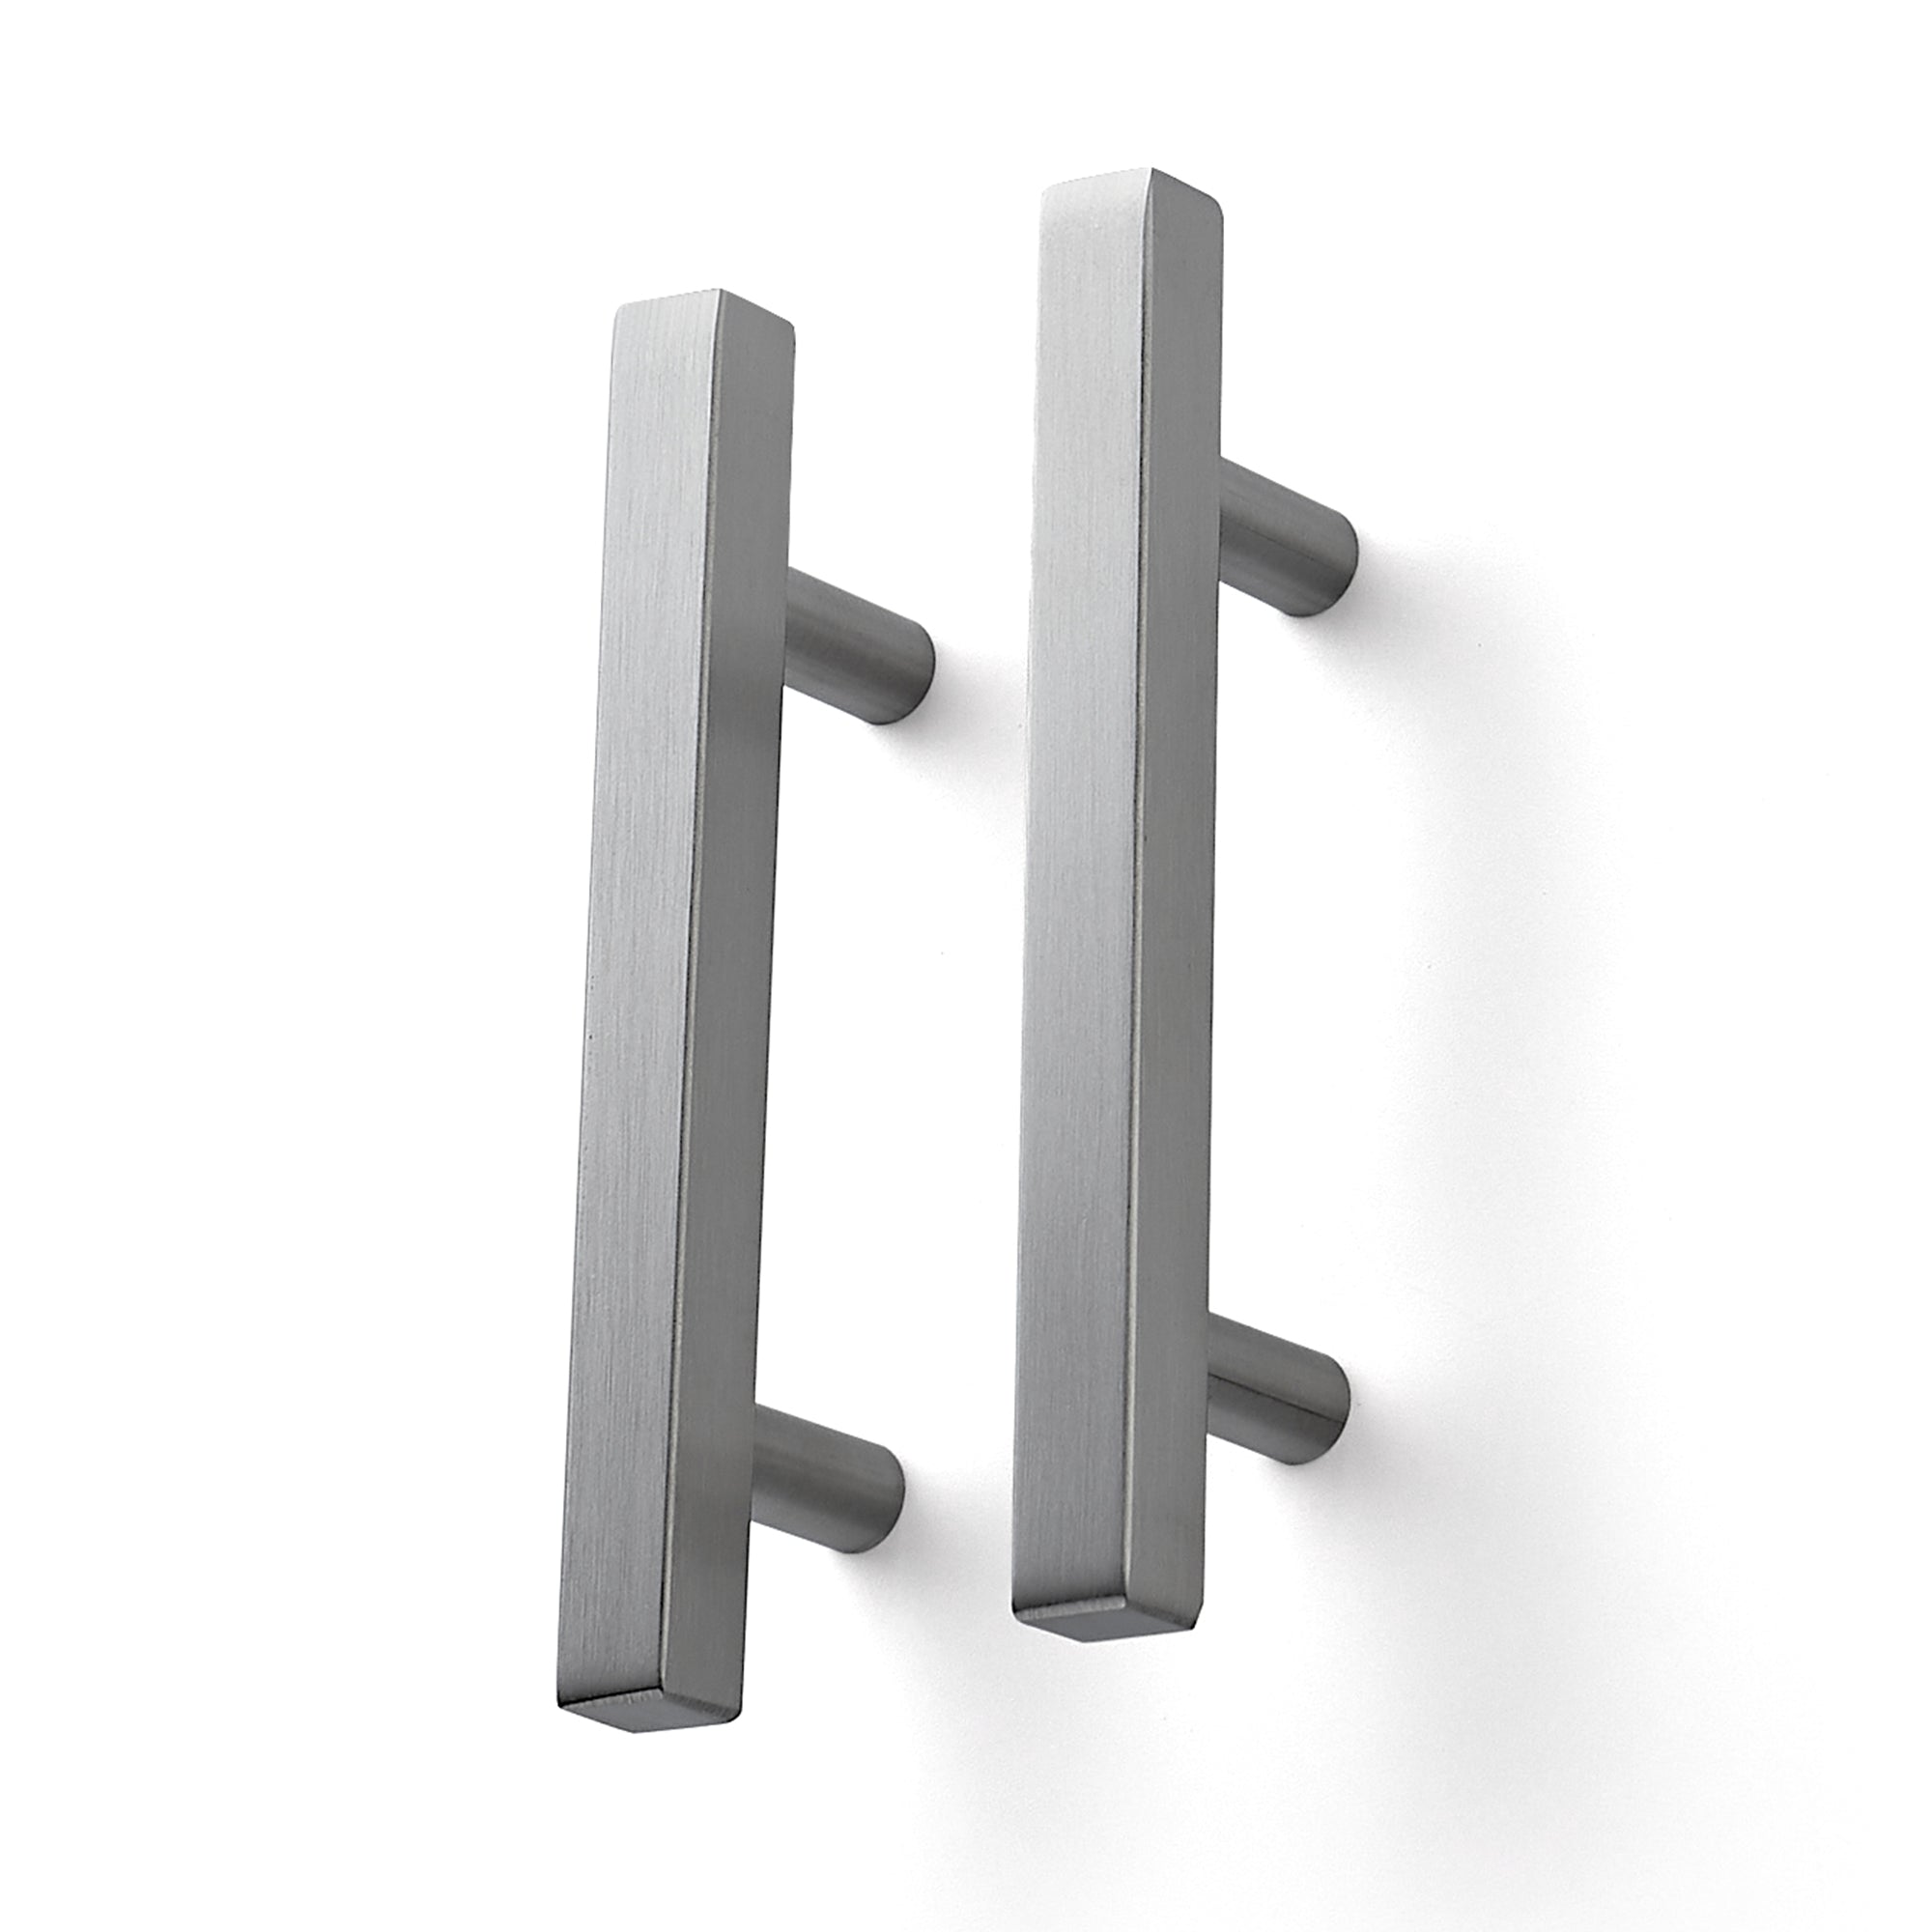 Ravinte 5 inch Square Cabinet Pulls Matte Black Stainless Steel Kitche